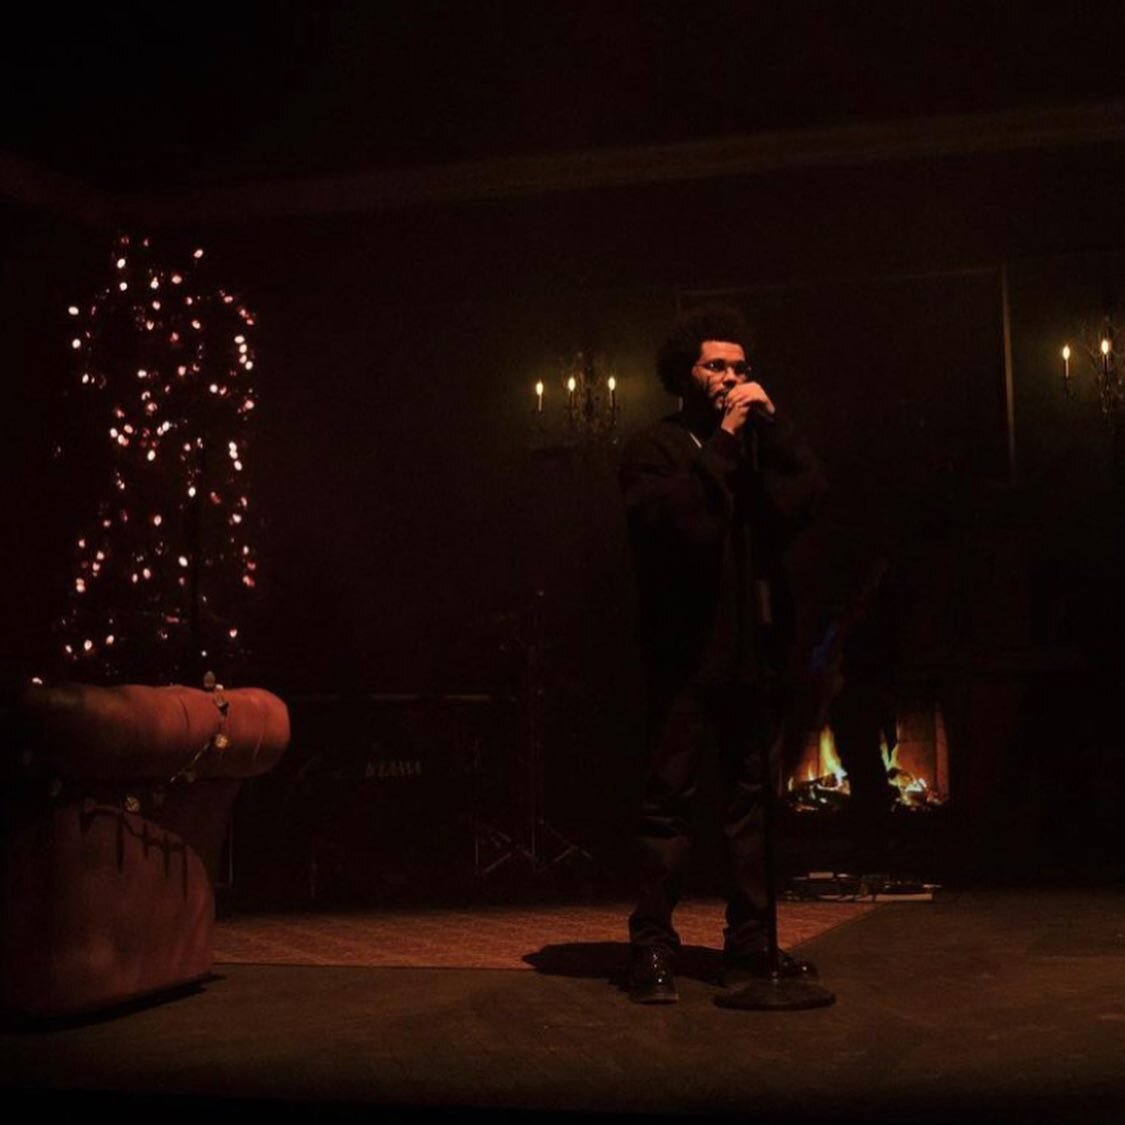 @theweeknd performance for @iheartjingleball !!! Herringbone oak floor with metallic green stain.  Plaster walls.  Custom@fireplace.  Pixel node LED string lights and custom grinchytree!  Fantastic team of people to celebrate the holidays with #covid